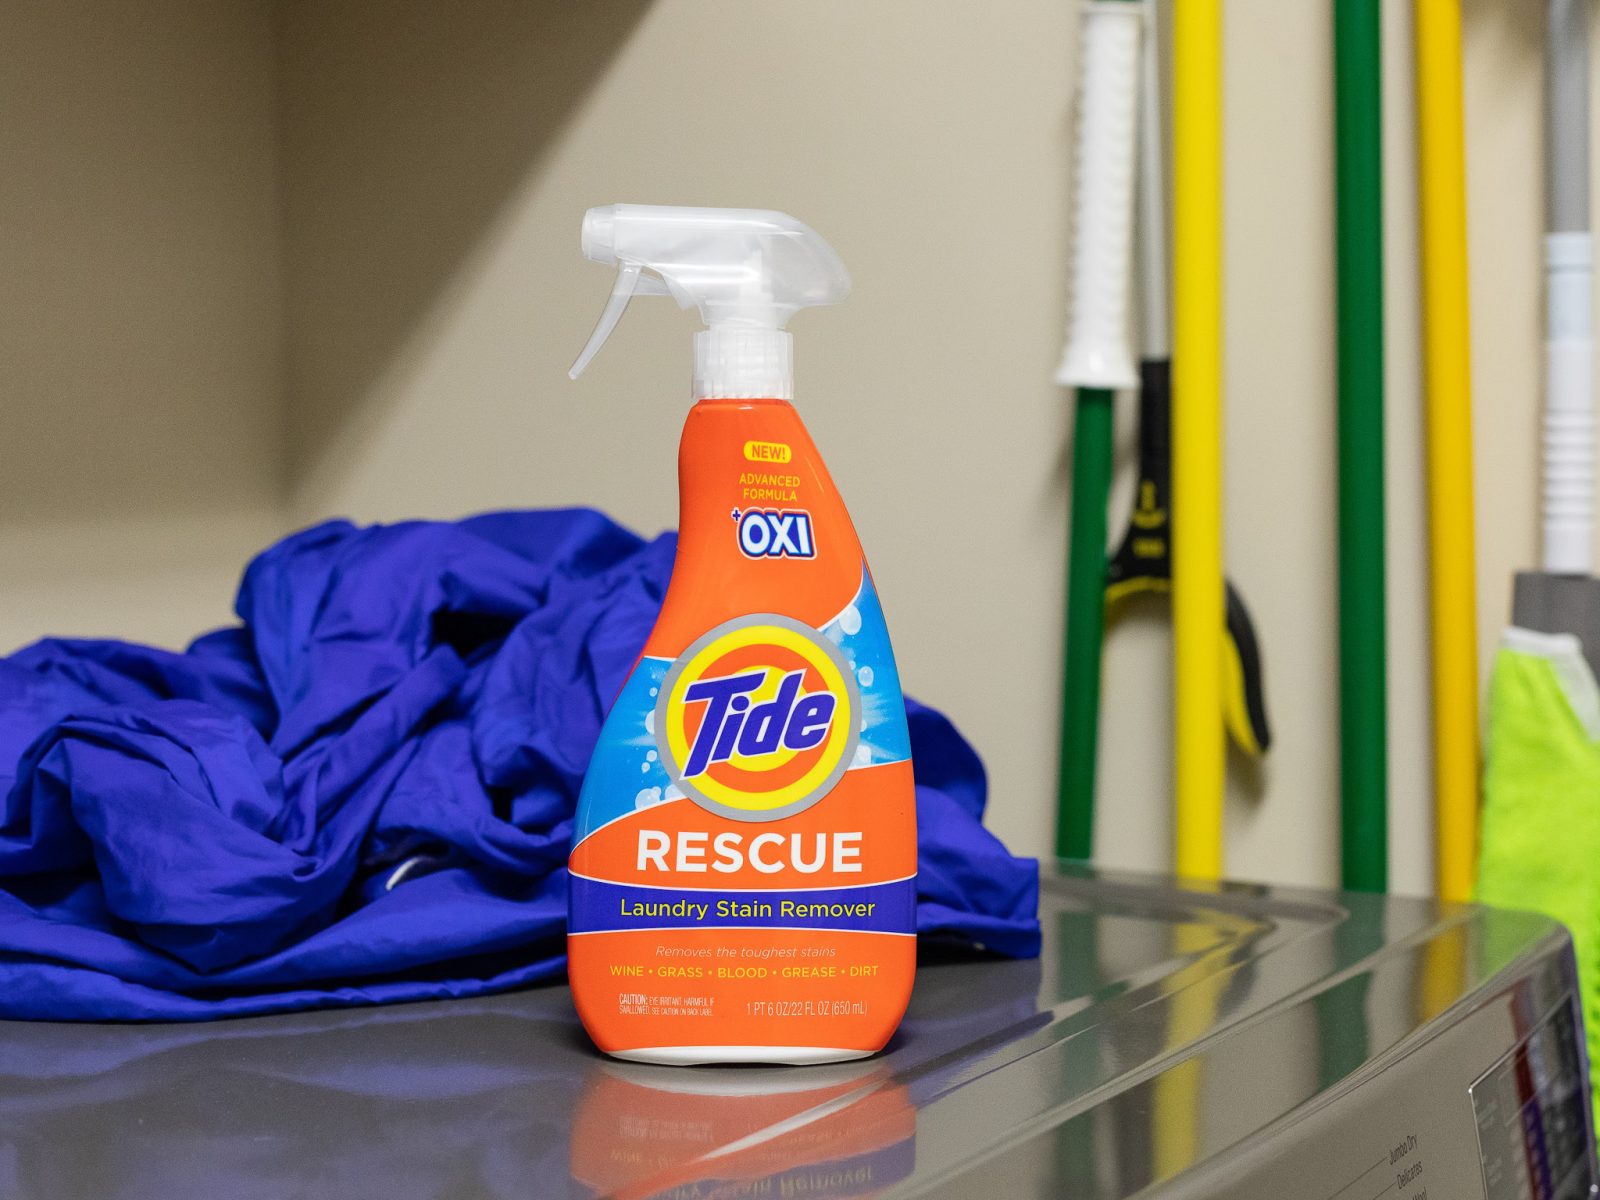 Tide Rescue Laundry Stain Remover Spray As Low As $1.49 At Kroger